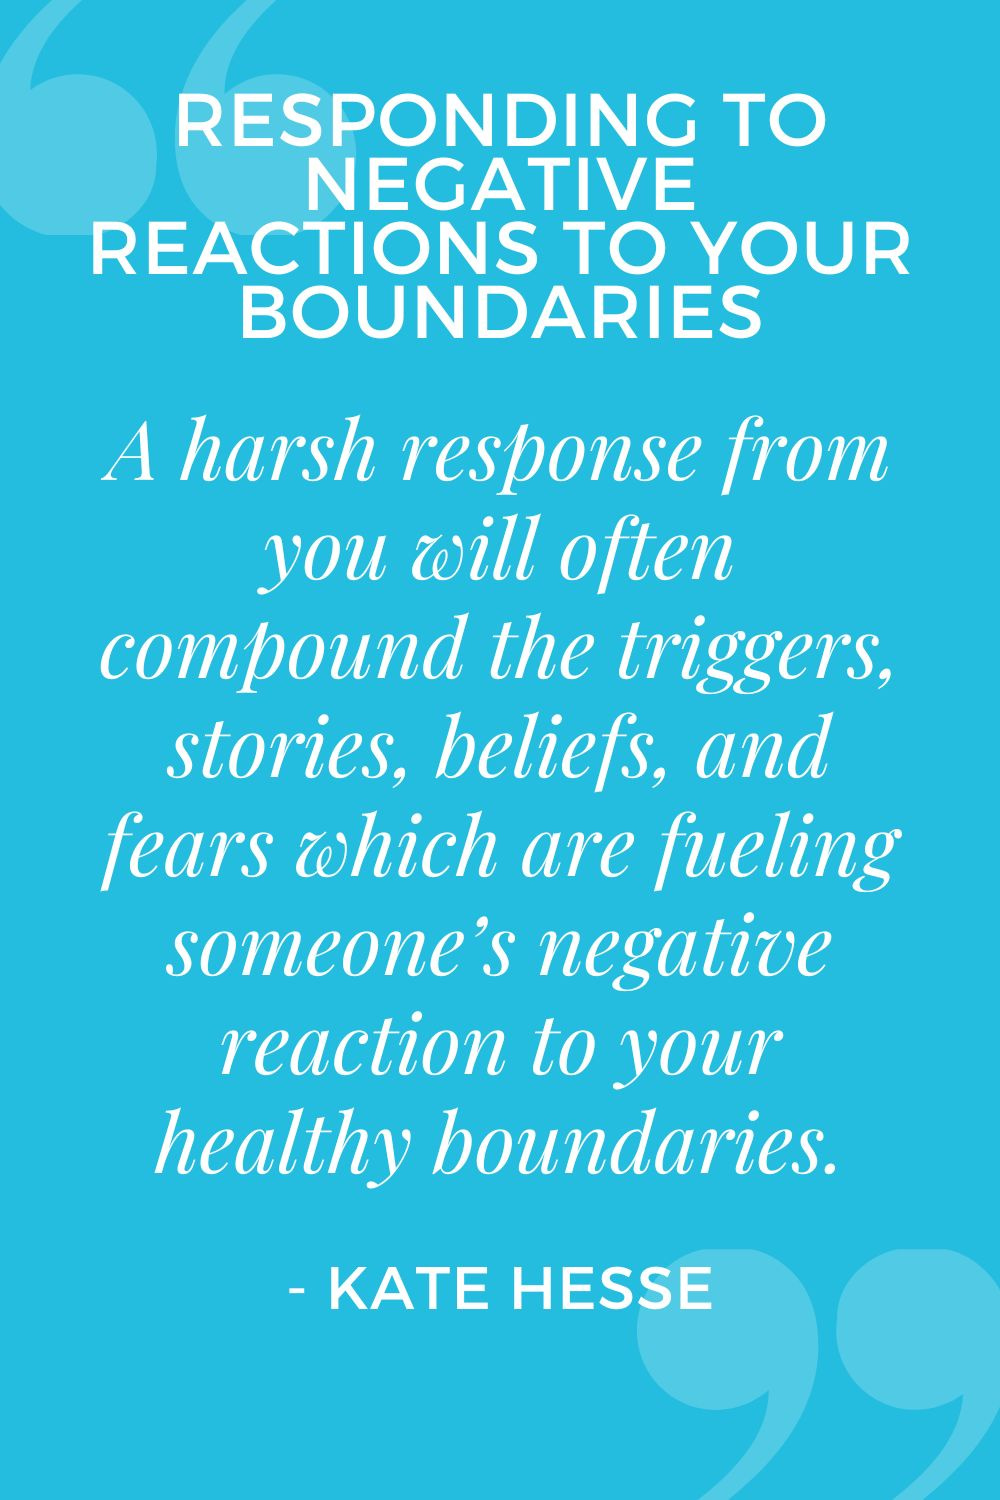 A harsh response from you will often compound the triggers, stories, beliefs, and fears which are fueling someone's negative reaction to your healthy boundaries.